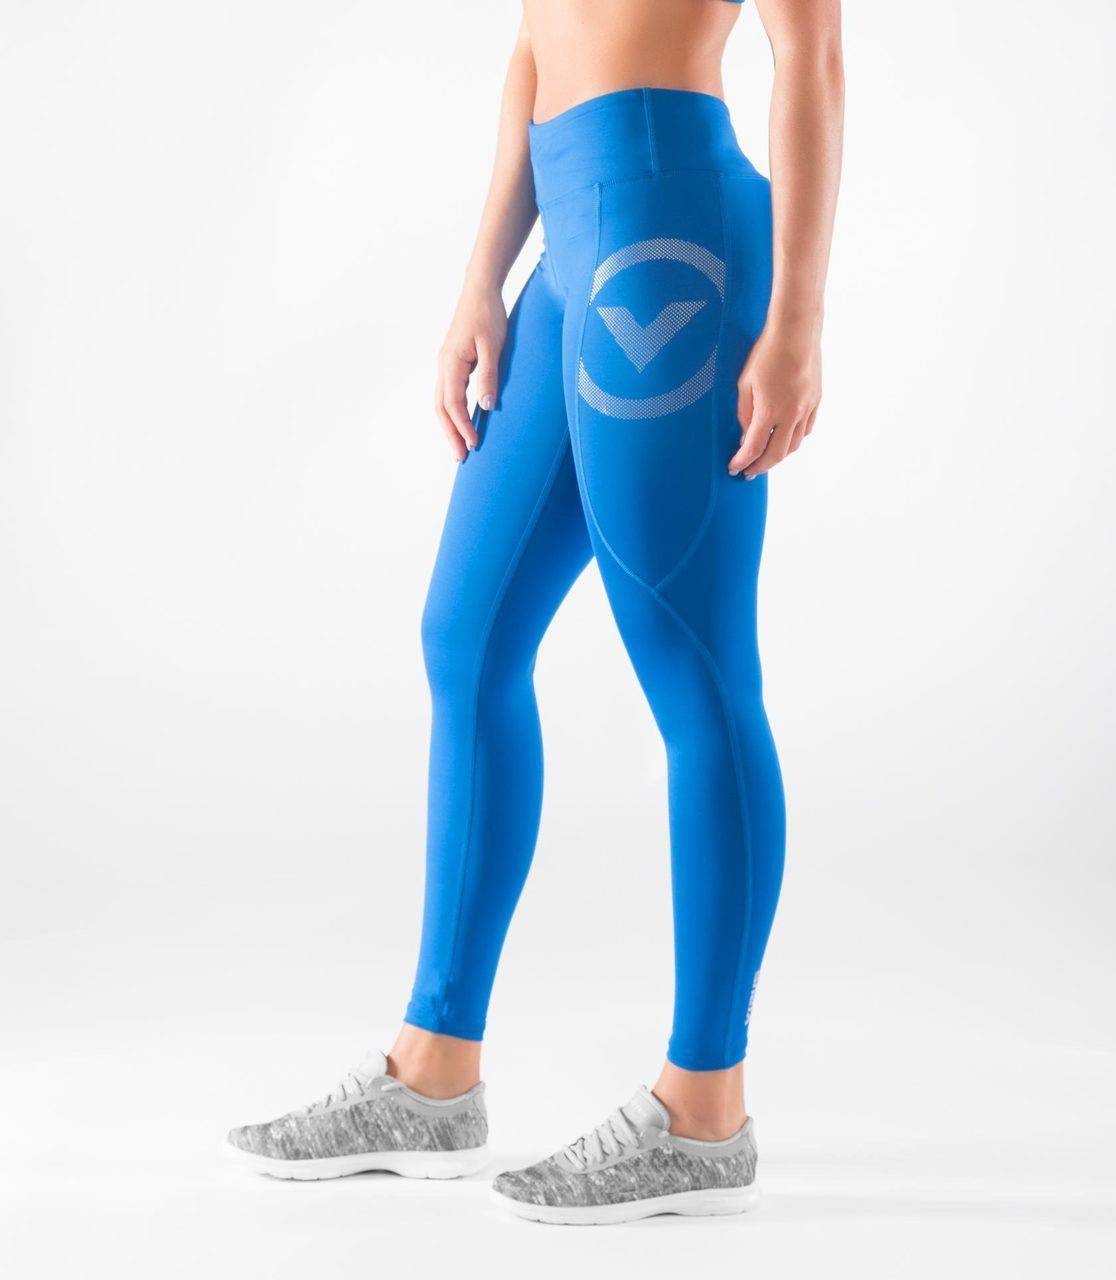 Virus | Erx7 Stay Cool Compression Pants - XTC Fitness - Exercise Equipment Superstore - Canada - Pants